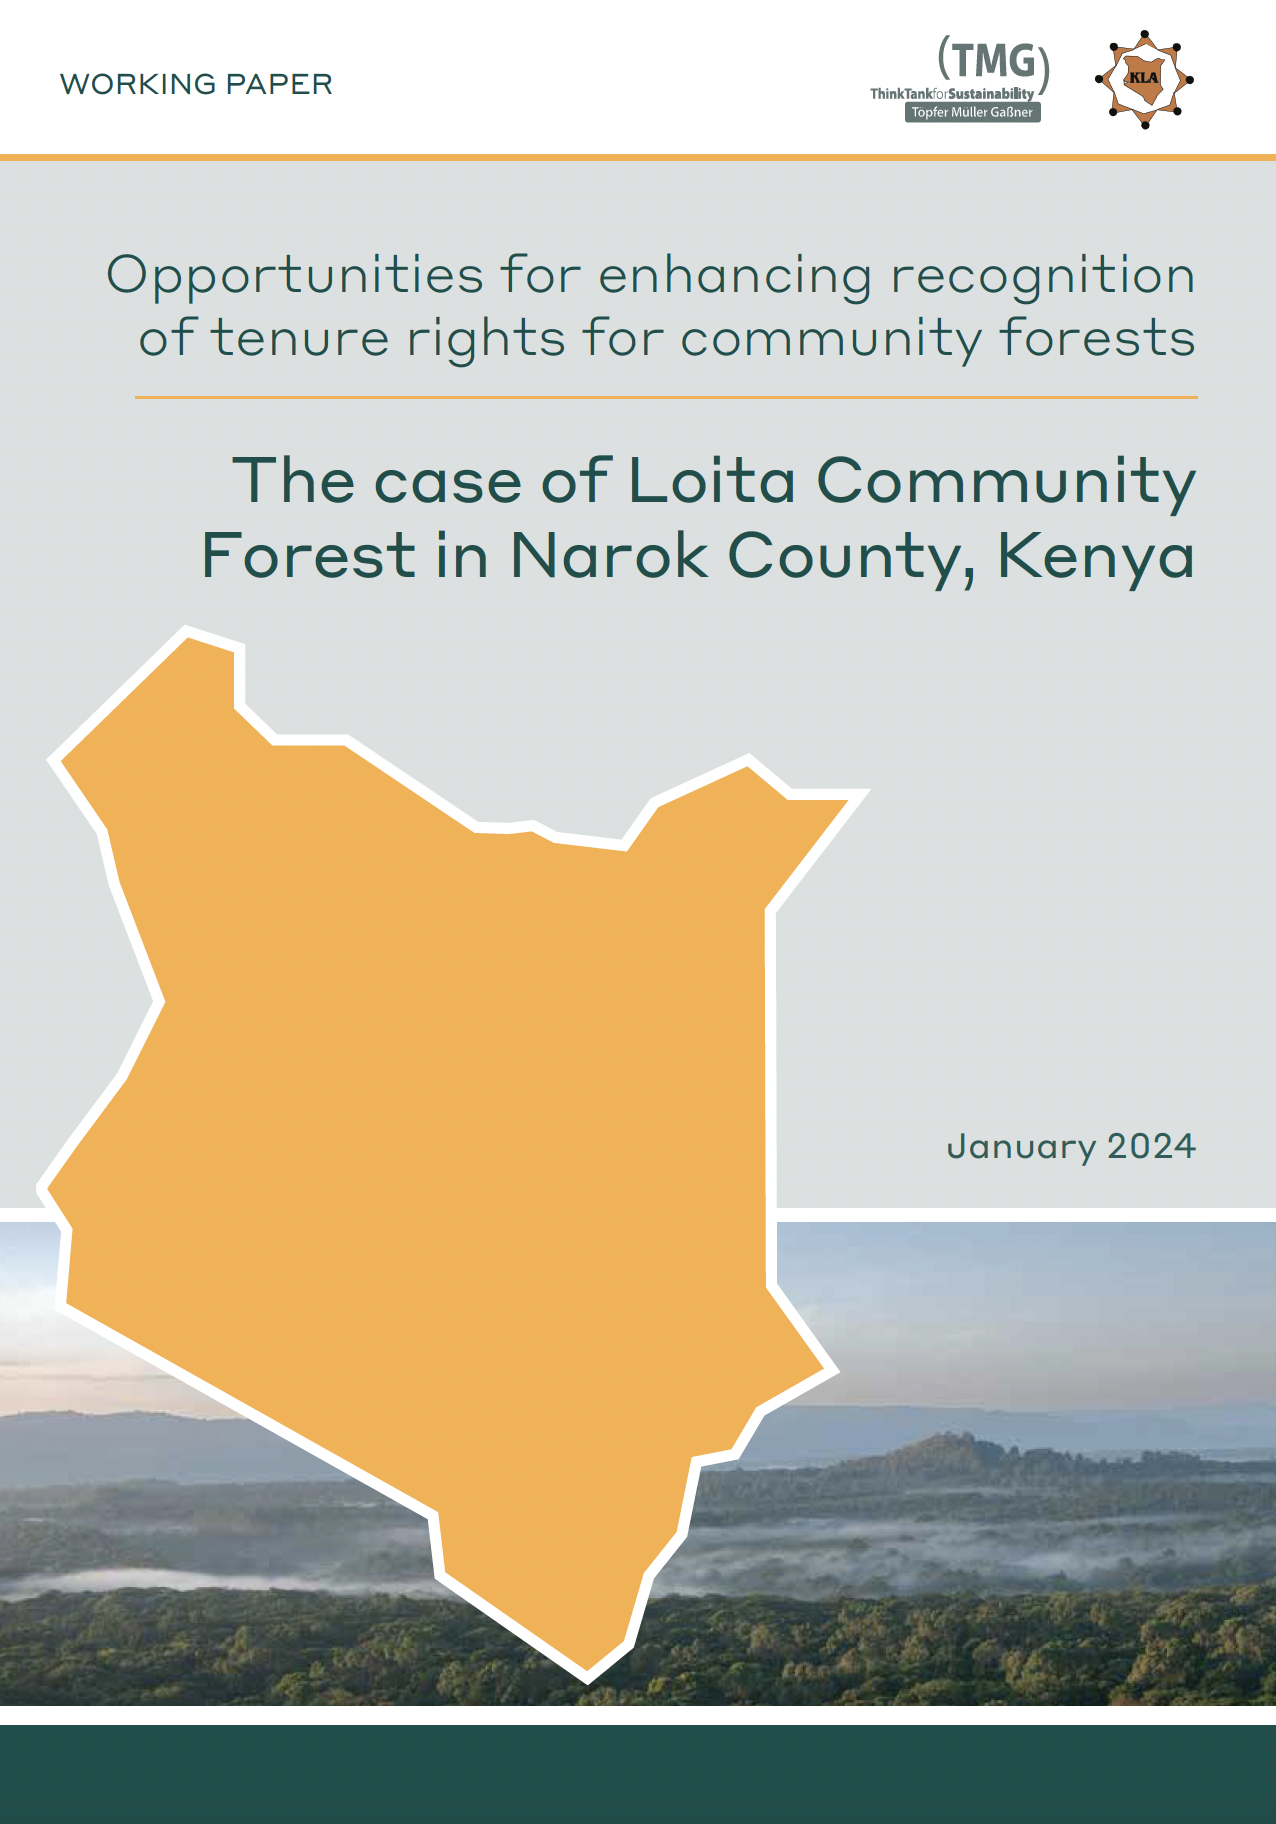 Opportunities for enhancing recognition of tenure rights for community forests. The case of Loita Community Forest in Narok County, Kenya